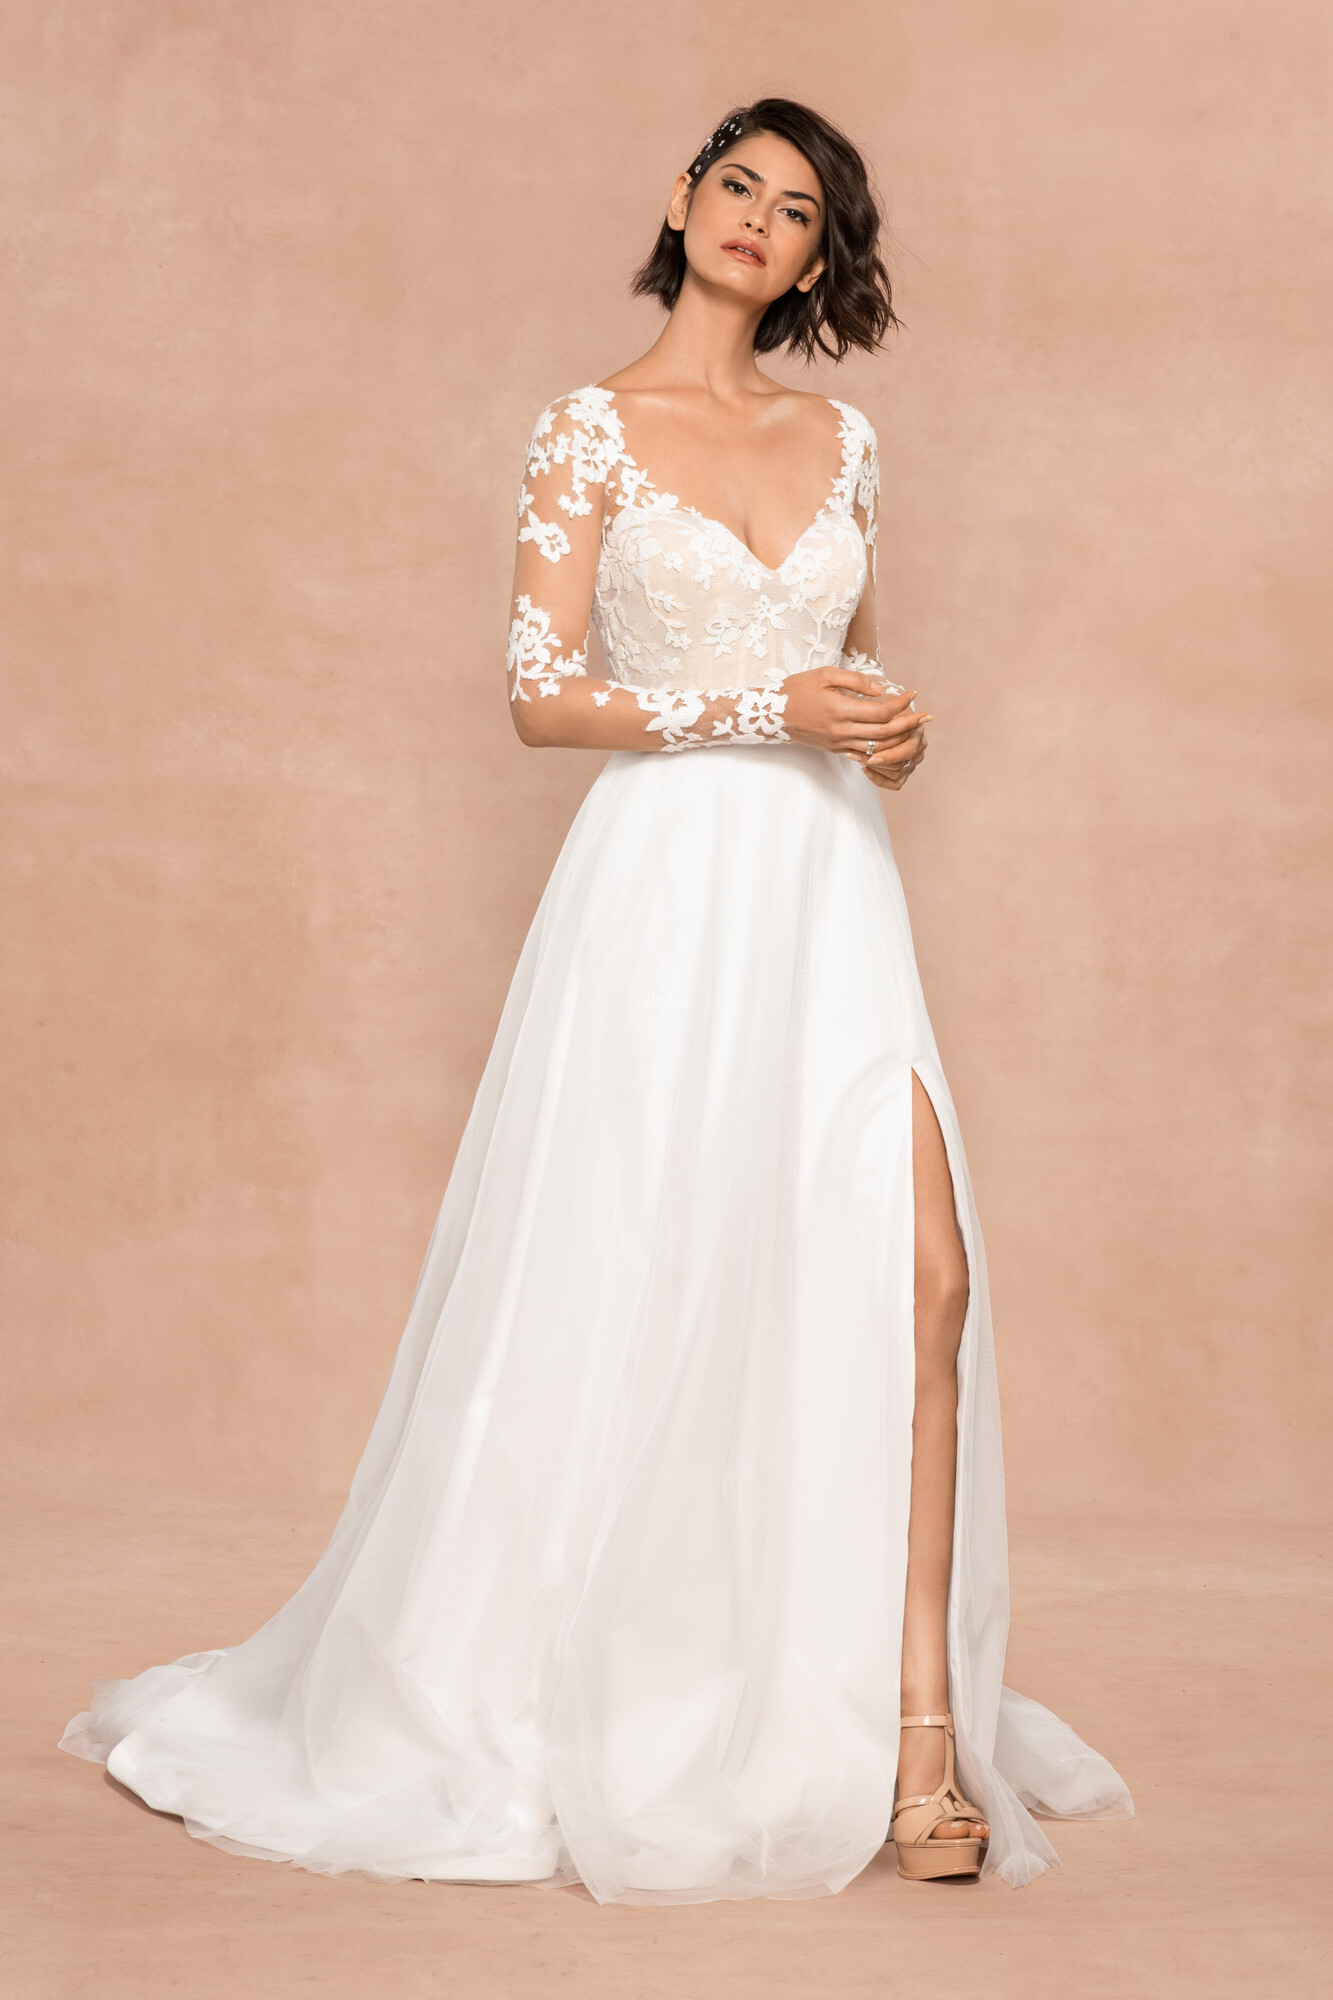 Blush by Hayley Paige Wedding Dresses | hitched.co.uk